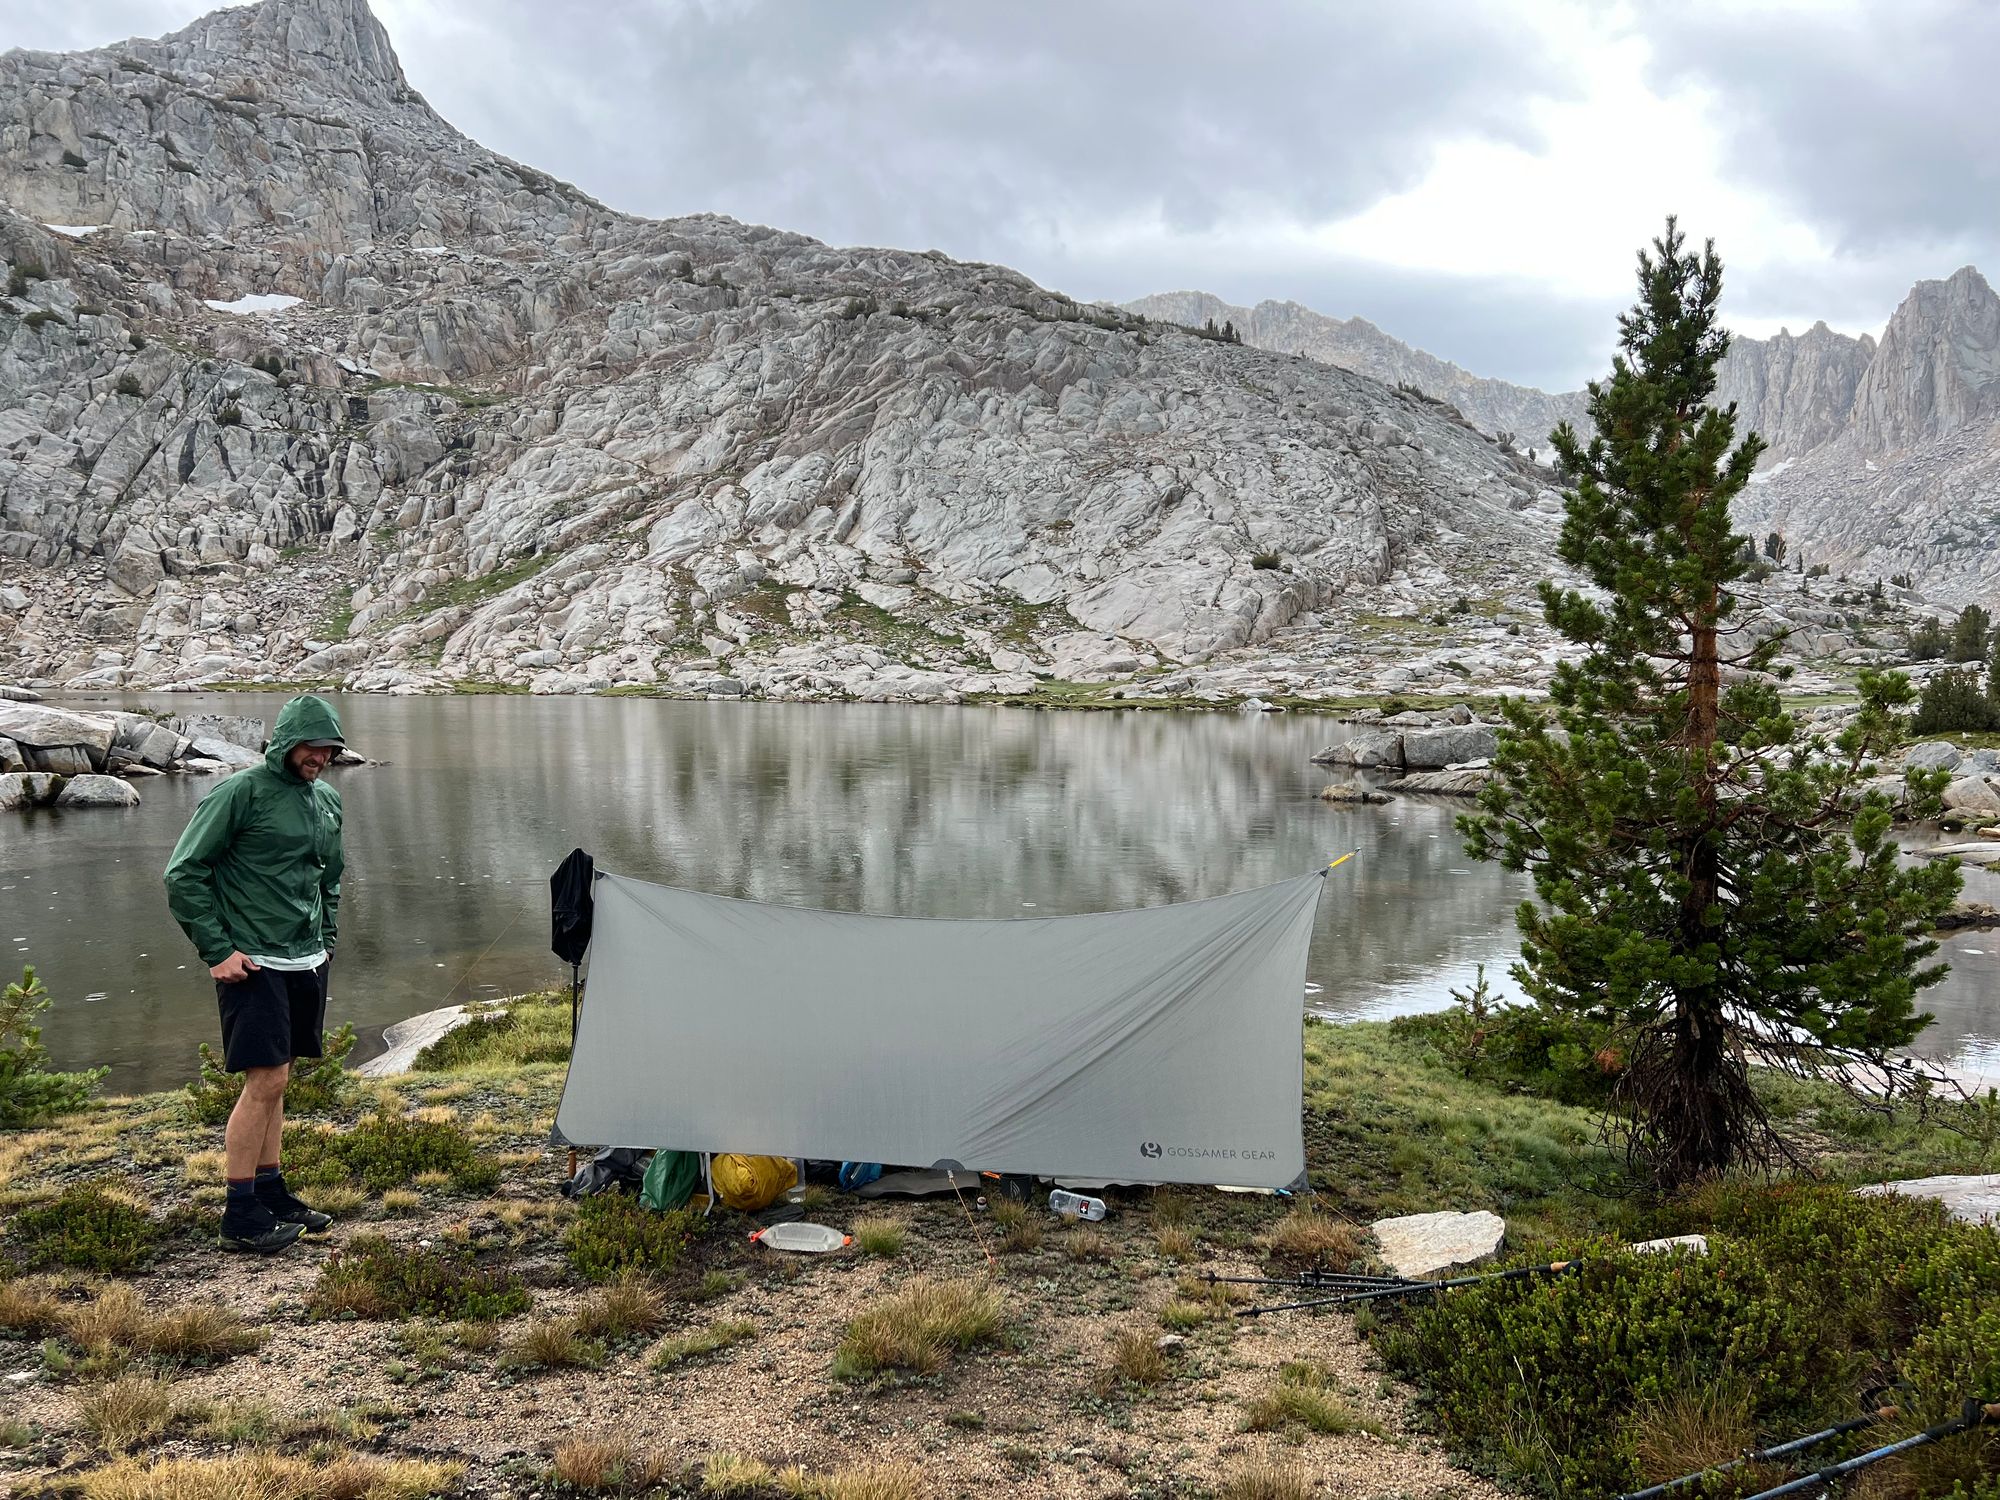 A man in a wet rain jacket standing next to a tarp set up in front of a lake.